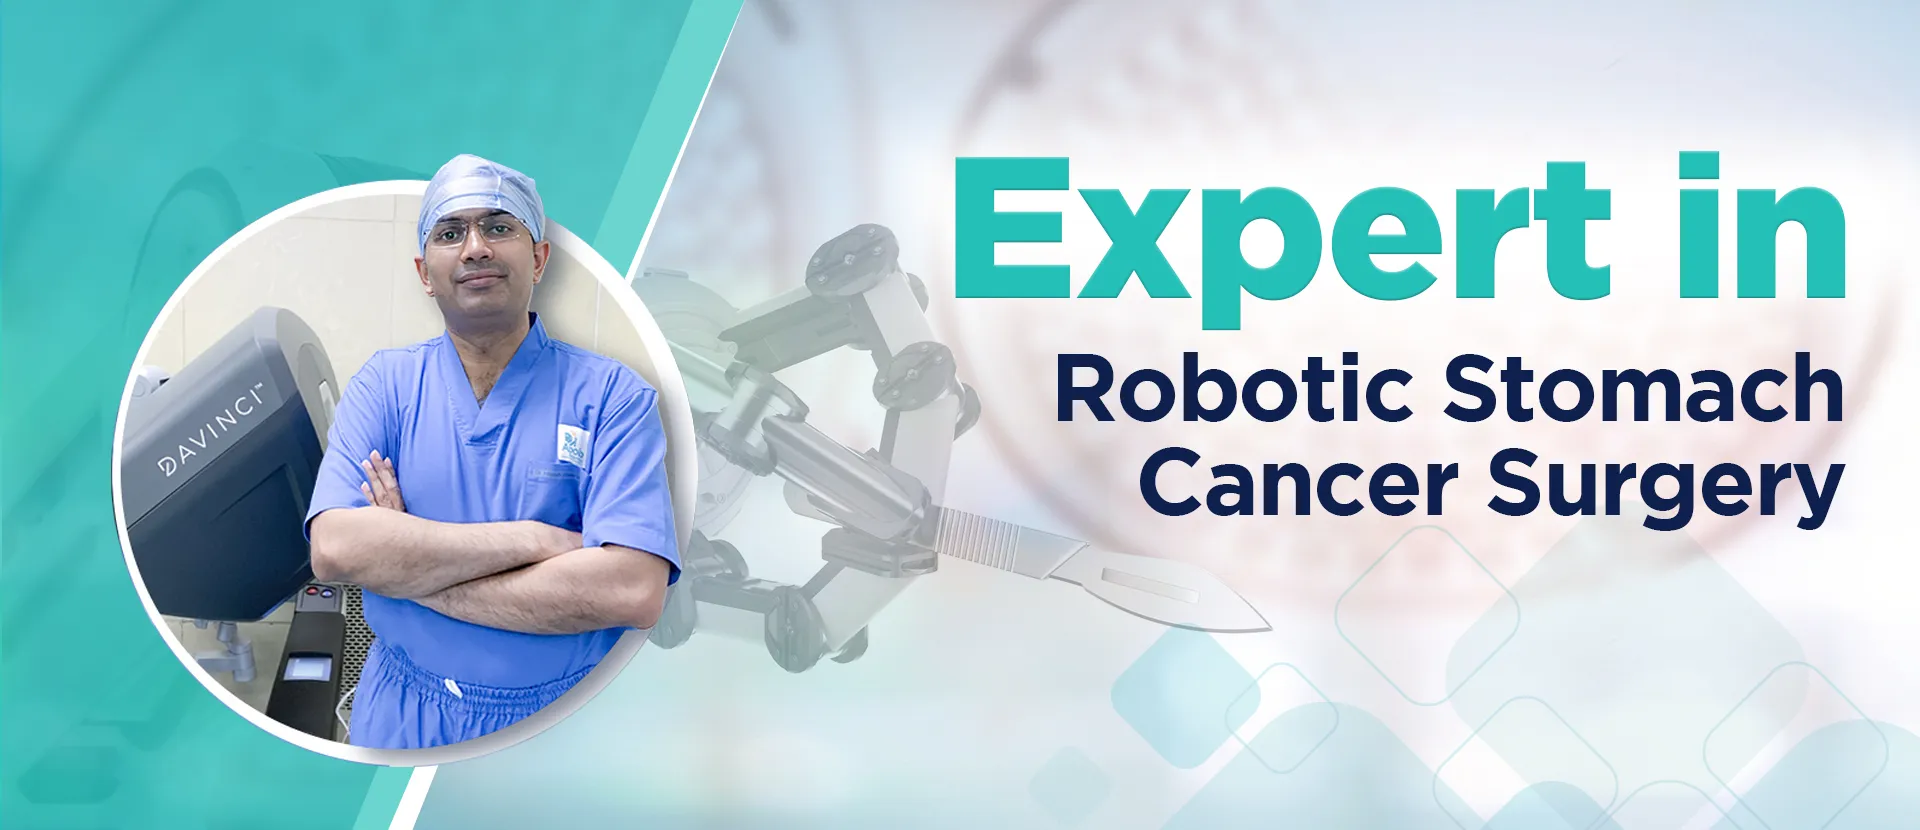 Best robotic stomach cancer surgery in Ahmedabad